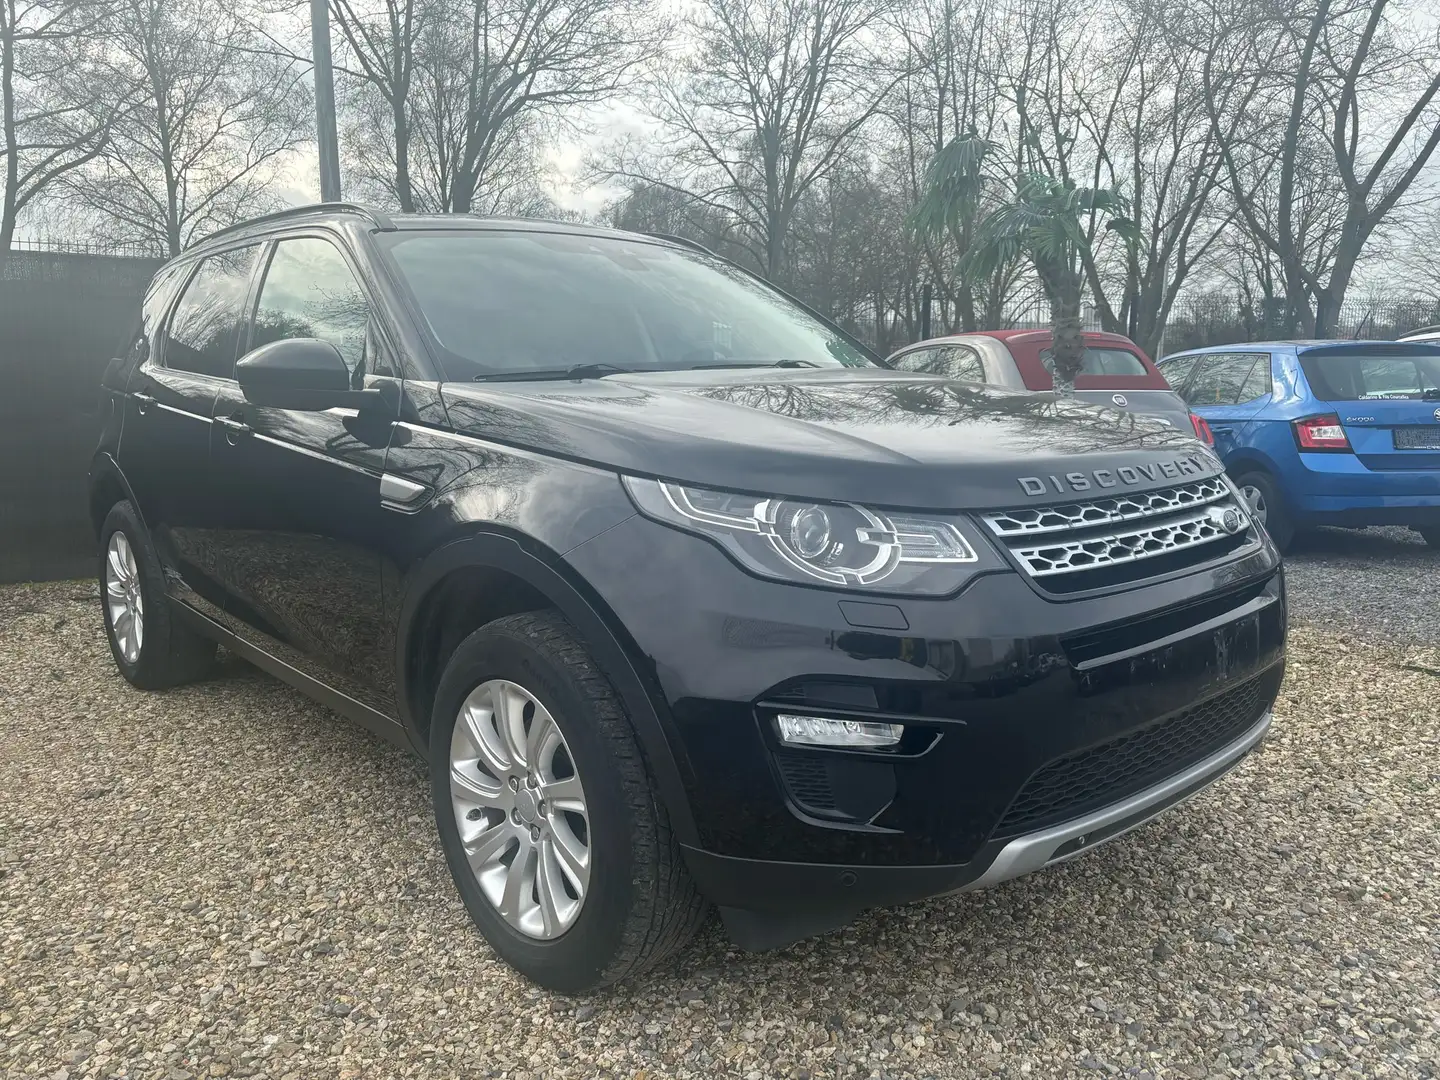 Land Rover Discovery Sport 2.2 TD4 HSE ! FULL OPTS - 7 PLACES - Perte puissa! Noir - 2